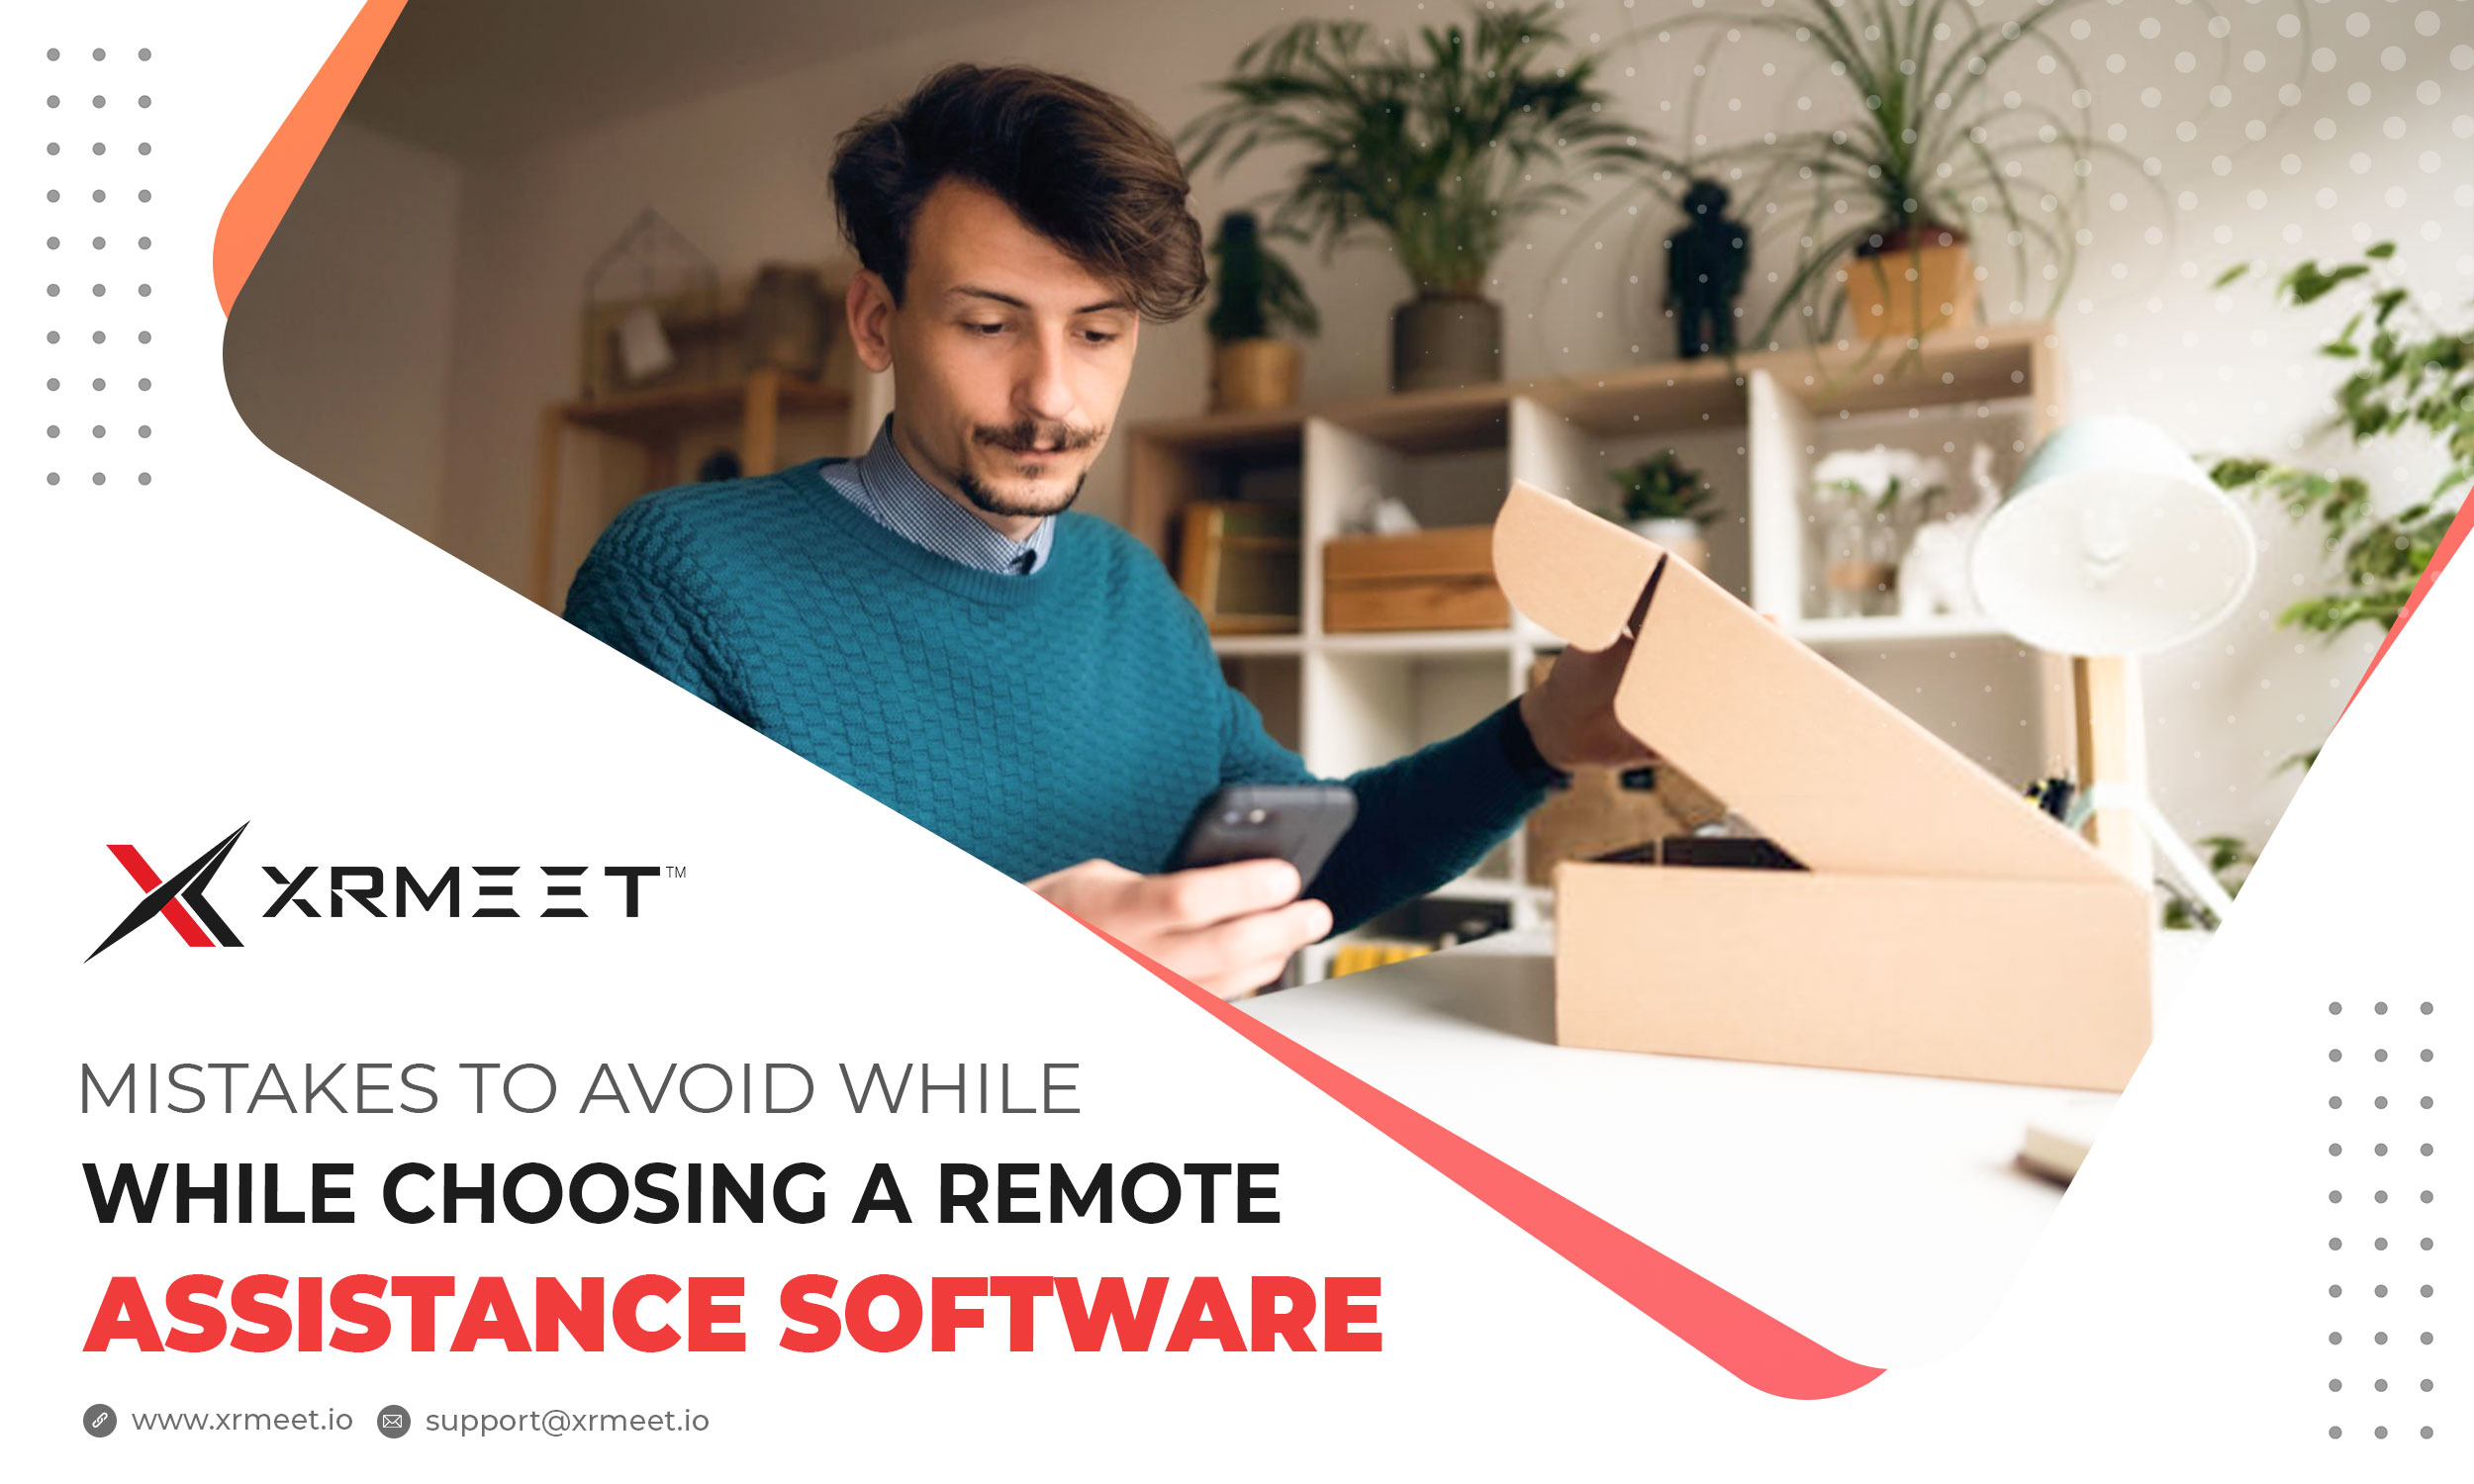 Common mistakes to avoid while choosing a remote assistance software
                           